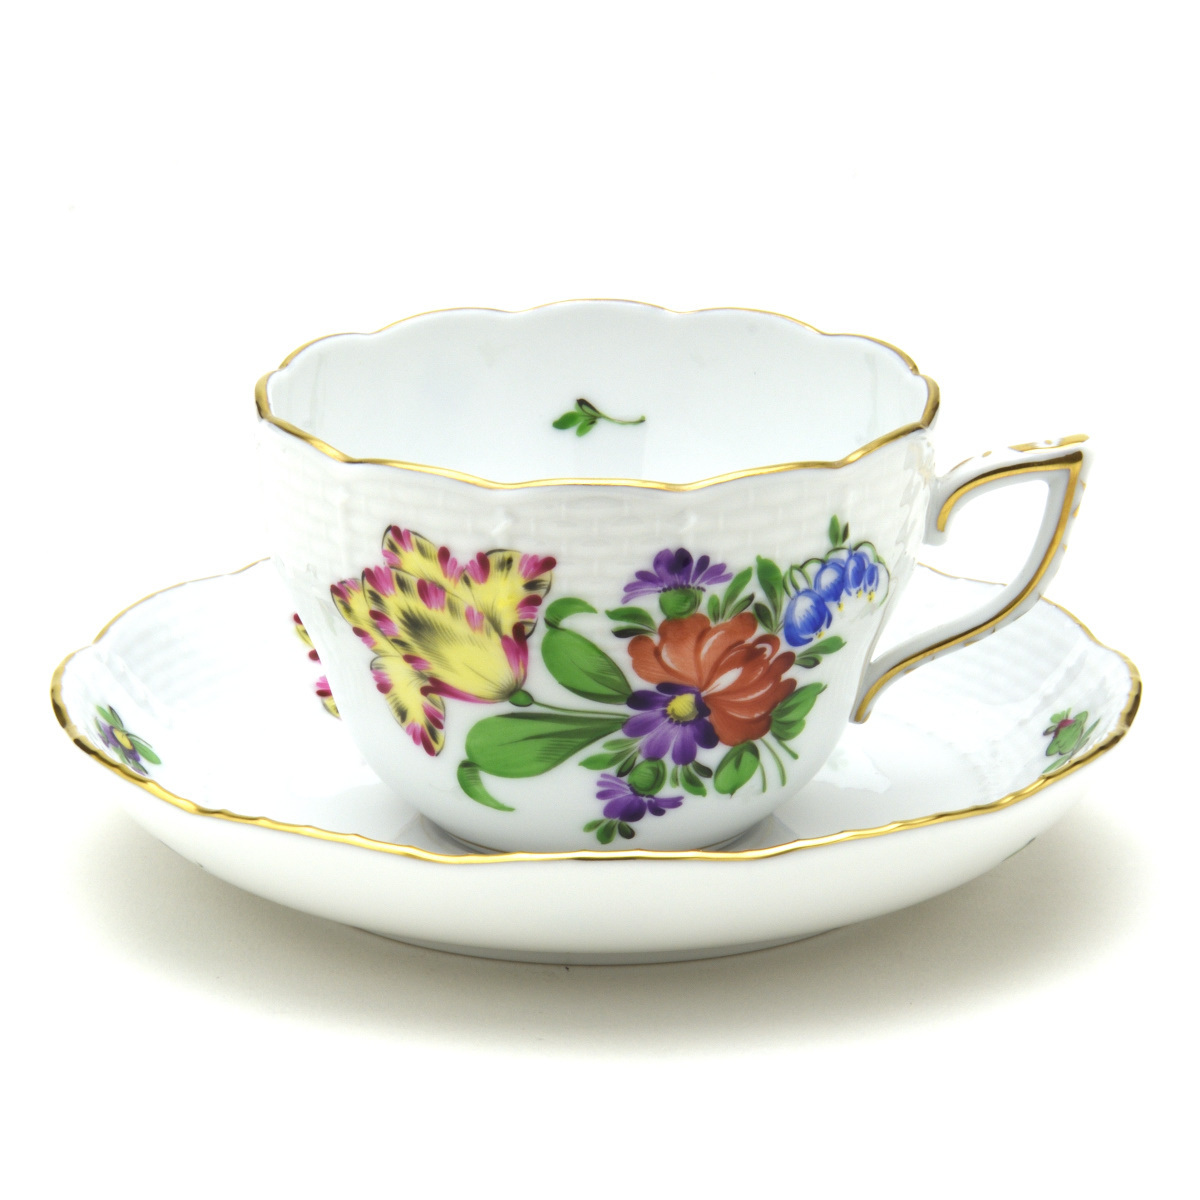 Herend Multipurpose Cup & Saucer Tulip Bouquet (BT-5) Hand Painted Porcelain Tableware Coffee/Tea Cup Tableware Made in Hungary New Herend, tea utensils, Cup and saucer, coffee, For both tea and tea